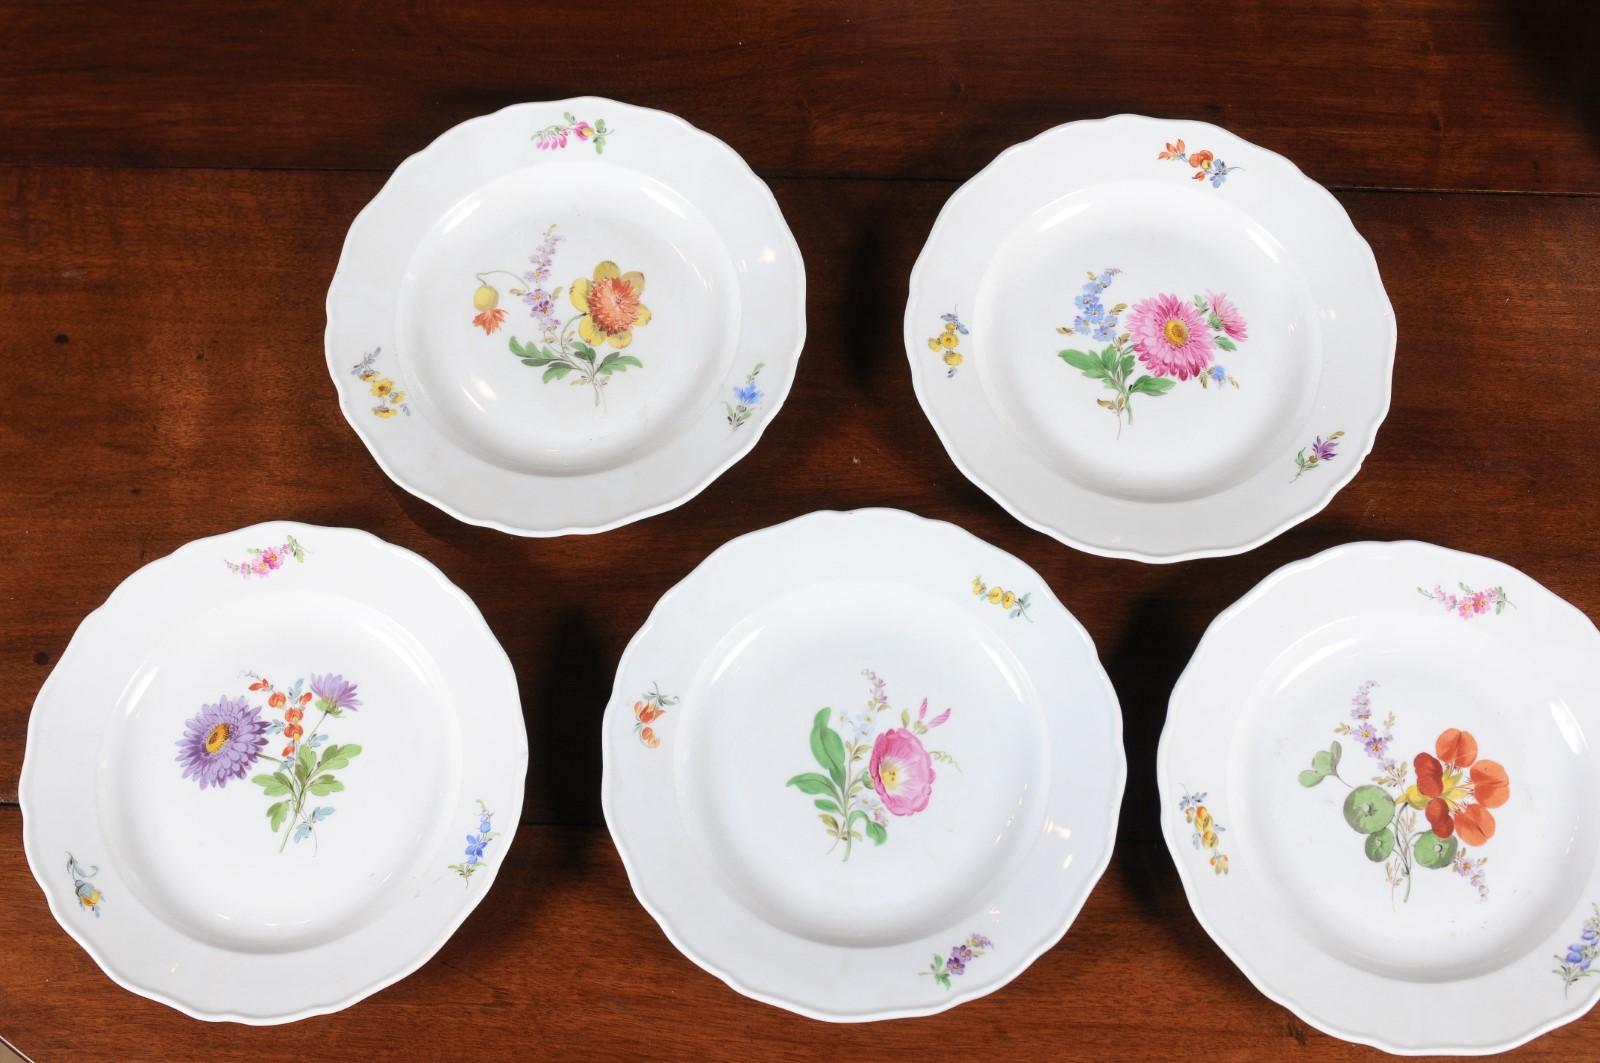 Set of 24 Pieces German Meissen Porcelain Dinner Service with Floral Decor In Good Condition For Sale In Atlanta, GA